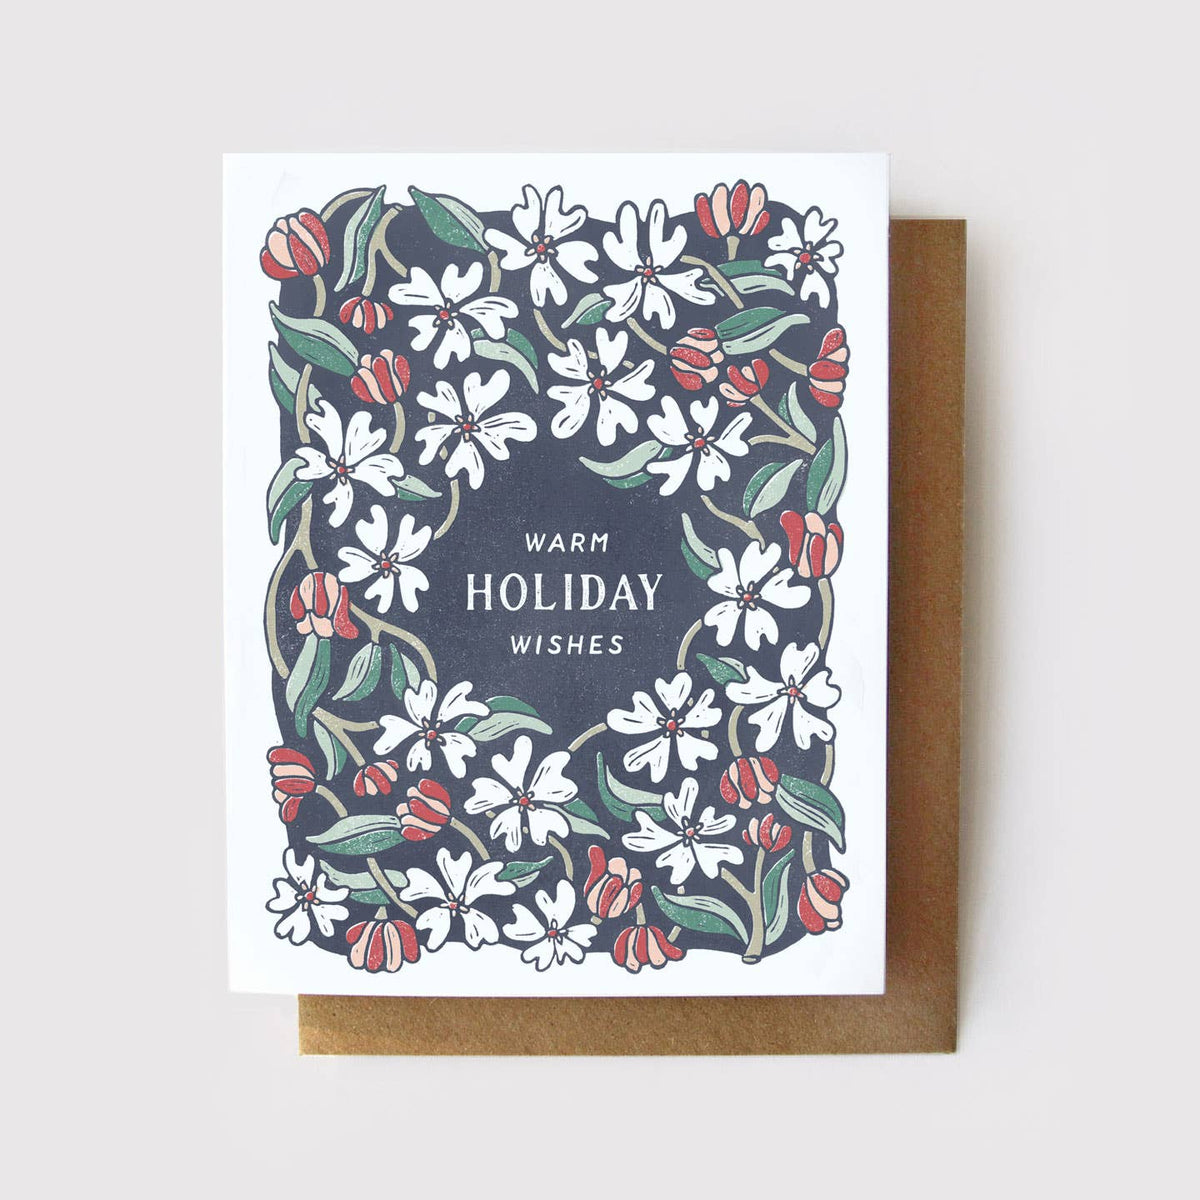 Warm Holiday Wishes Card - Floral Eco Friendly Holiday Card